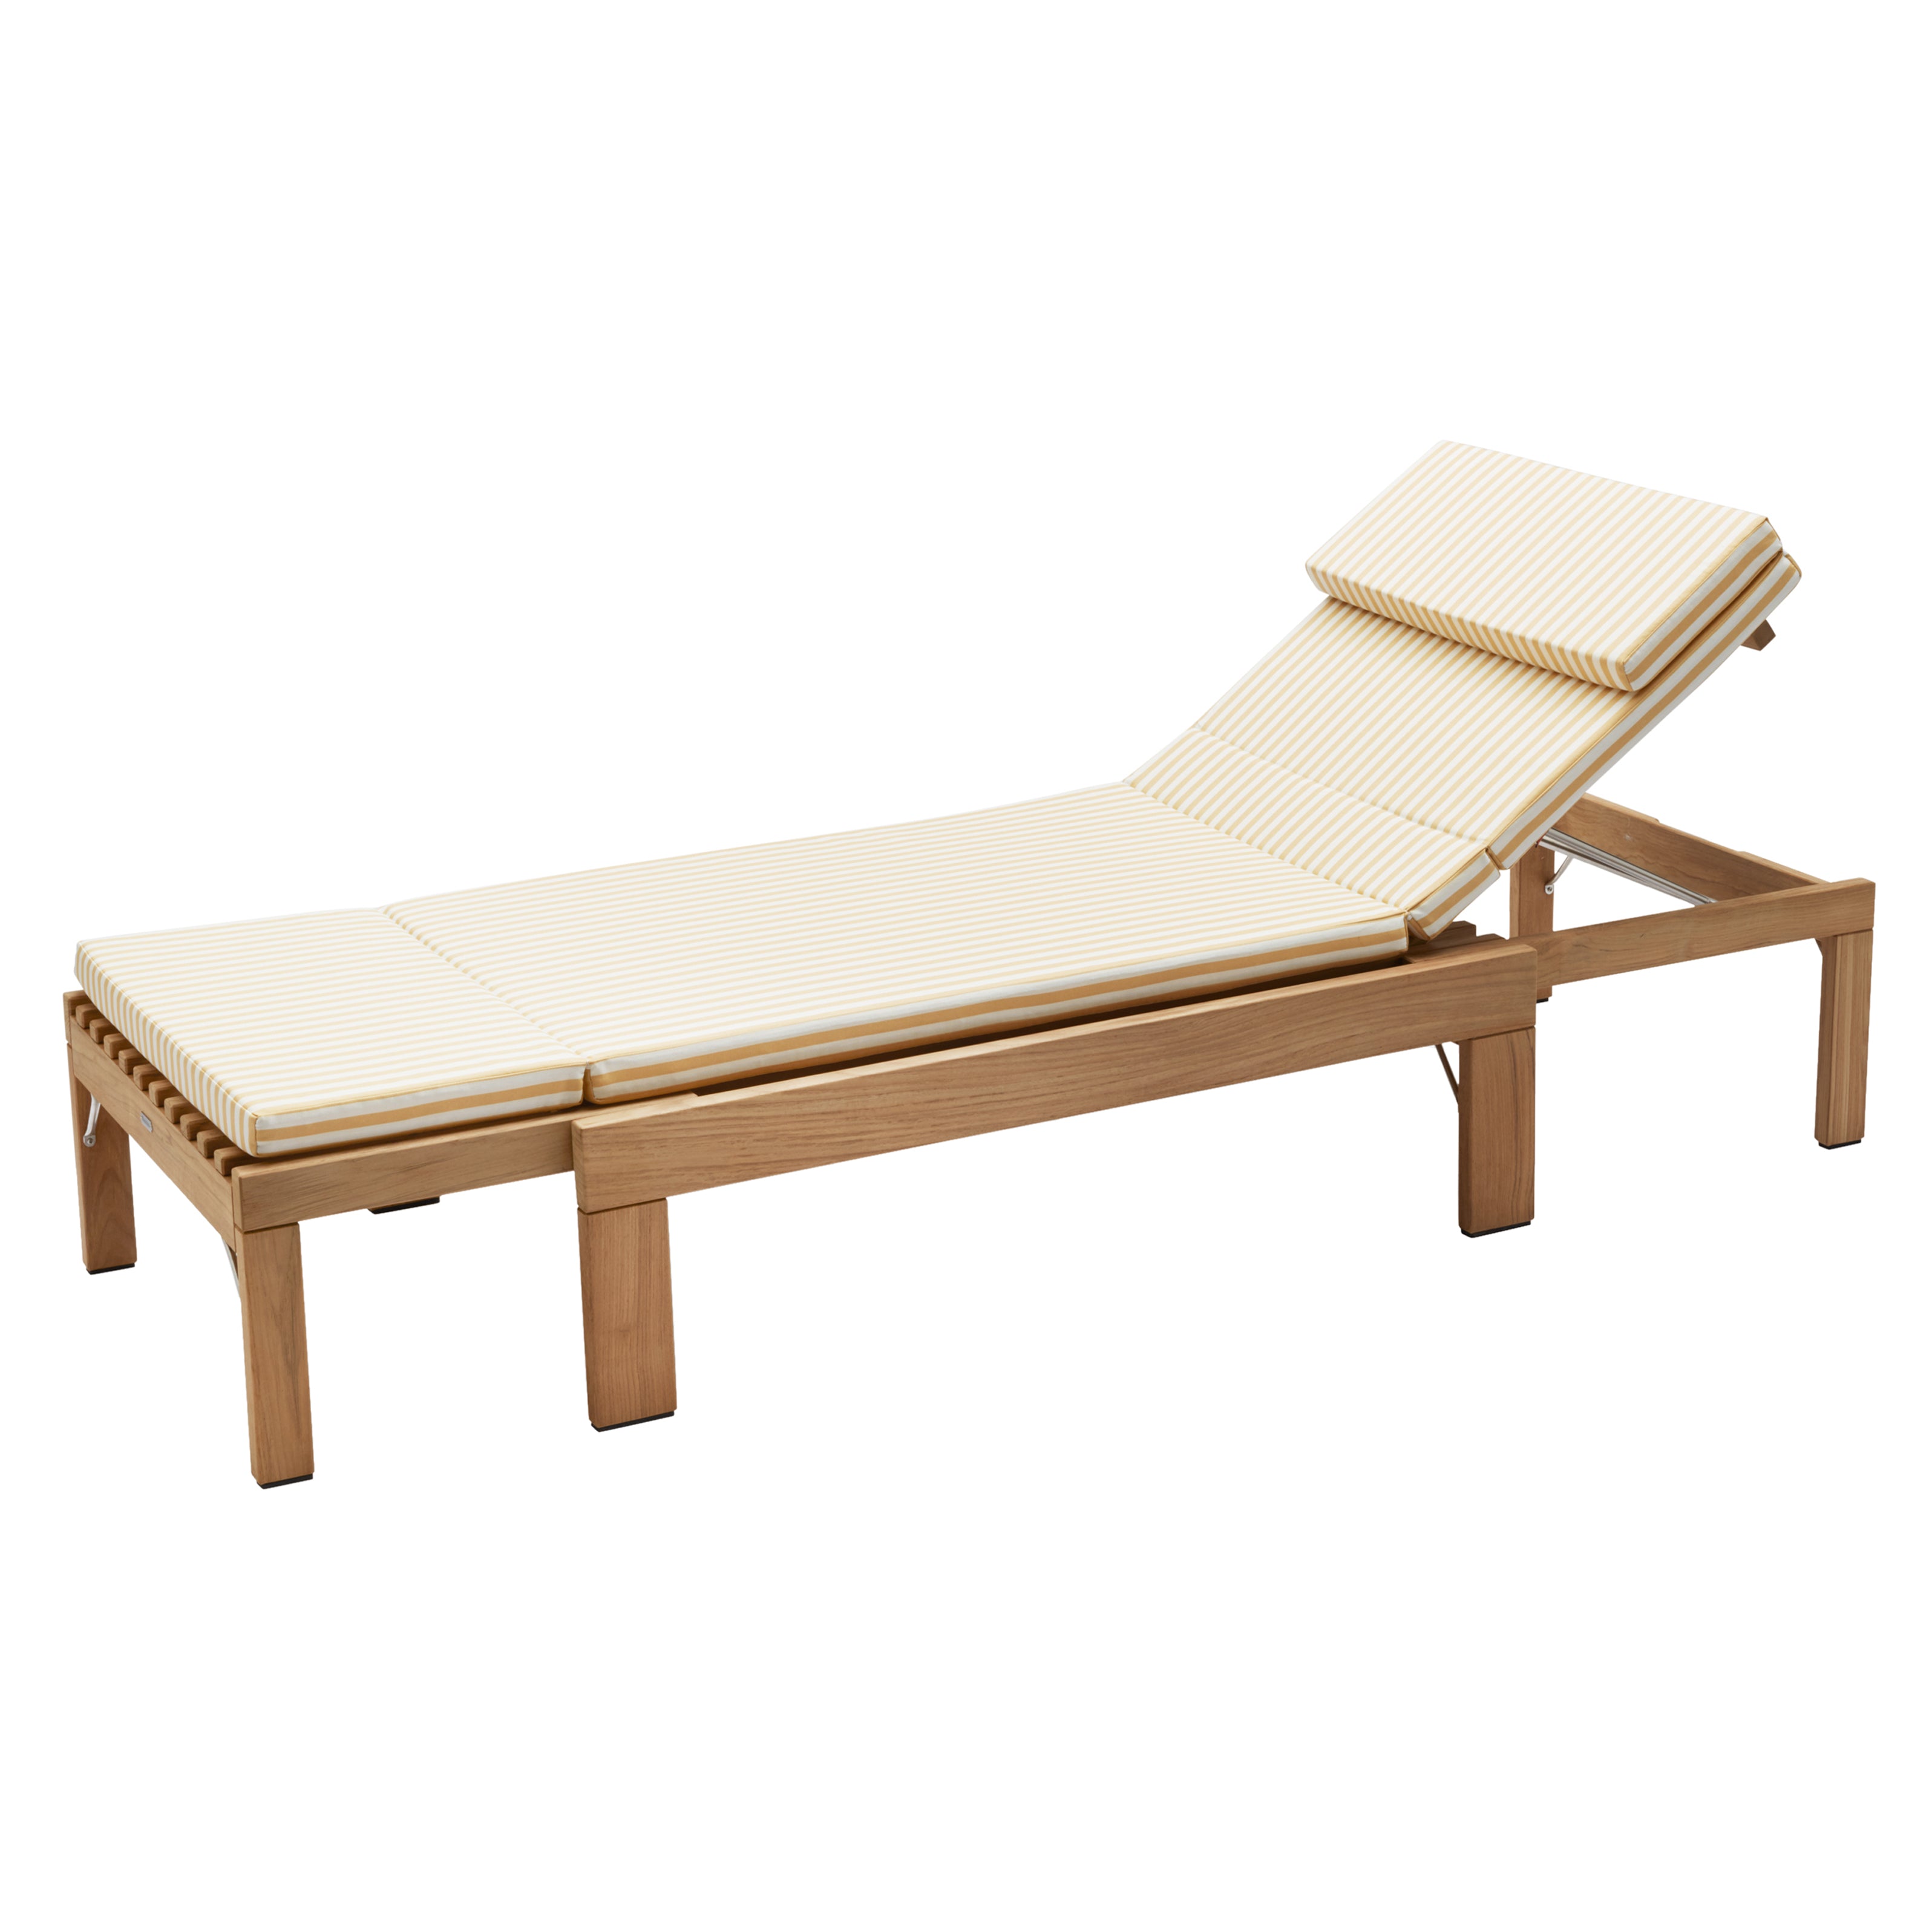 Riviera Sunbed: With Golden Yellow Stripe Cushion